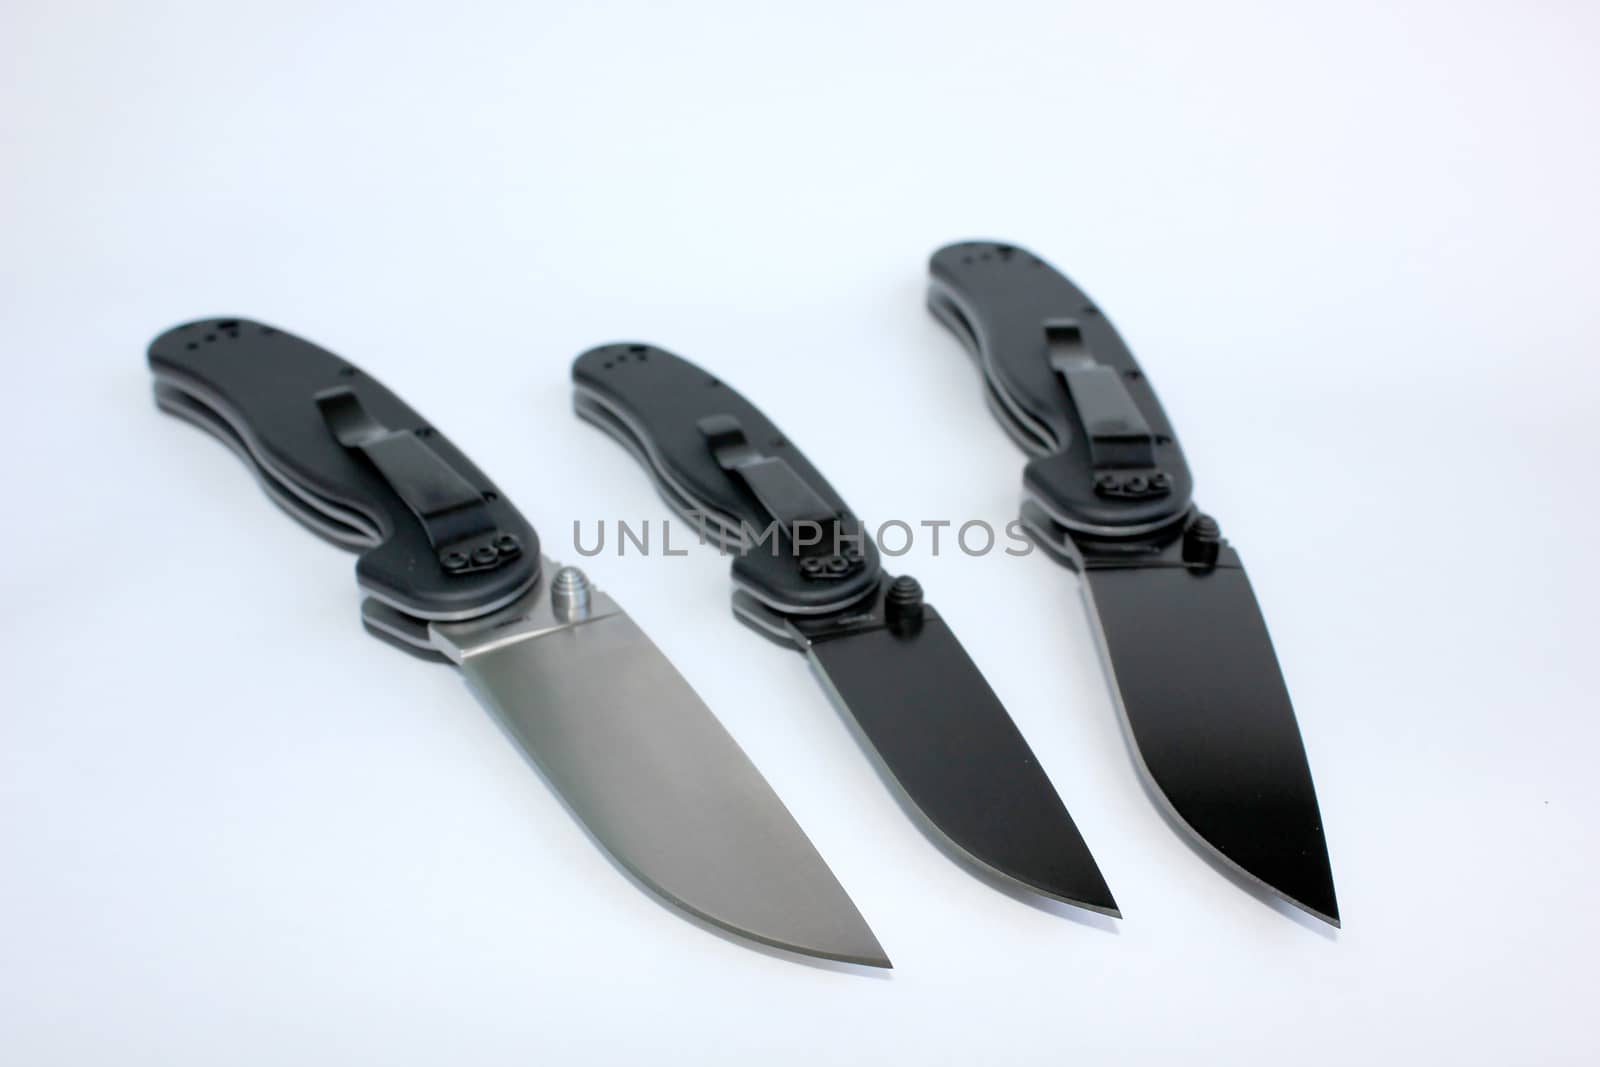 The knives of one model, the different size reminding a rat in a form